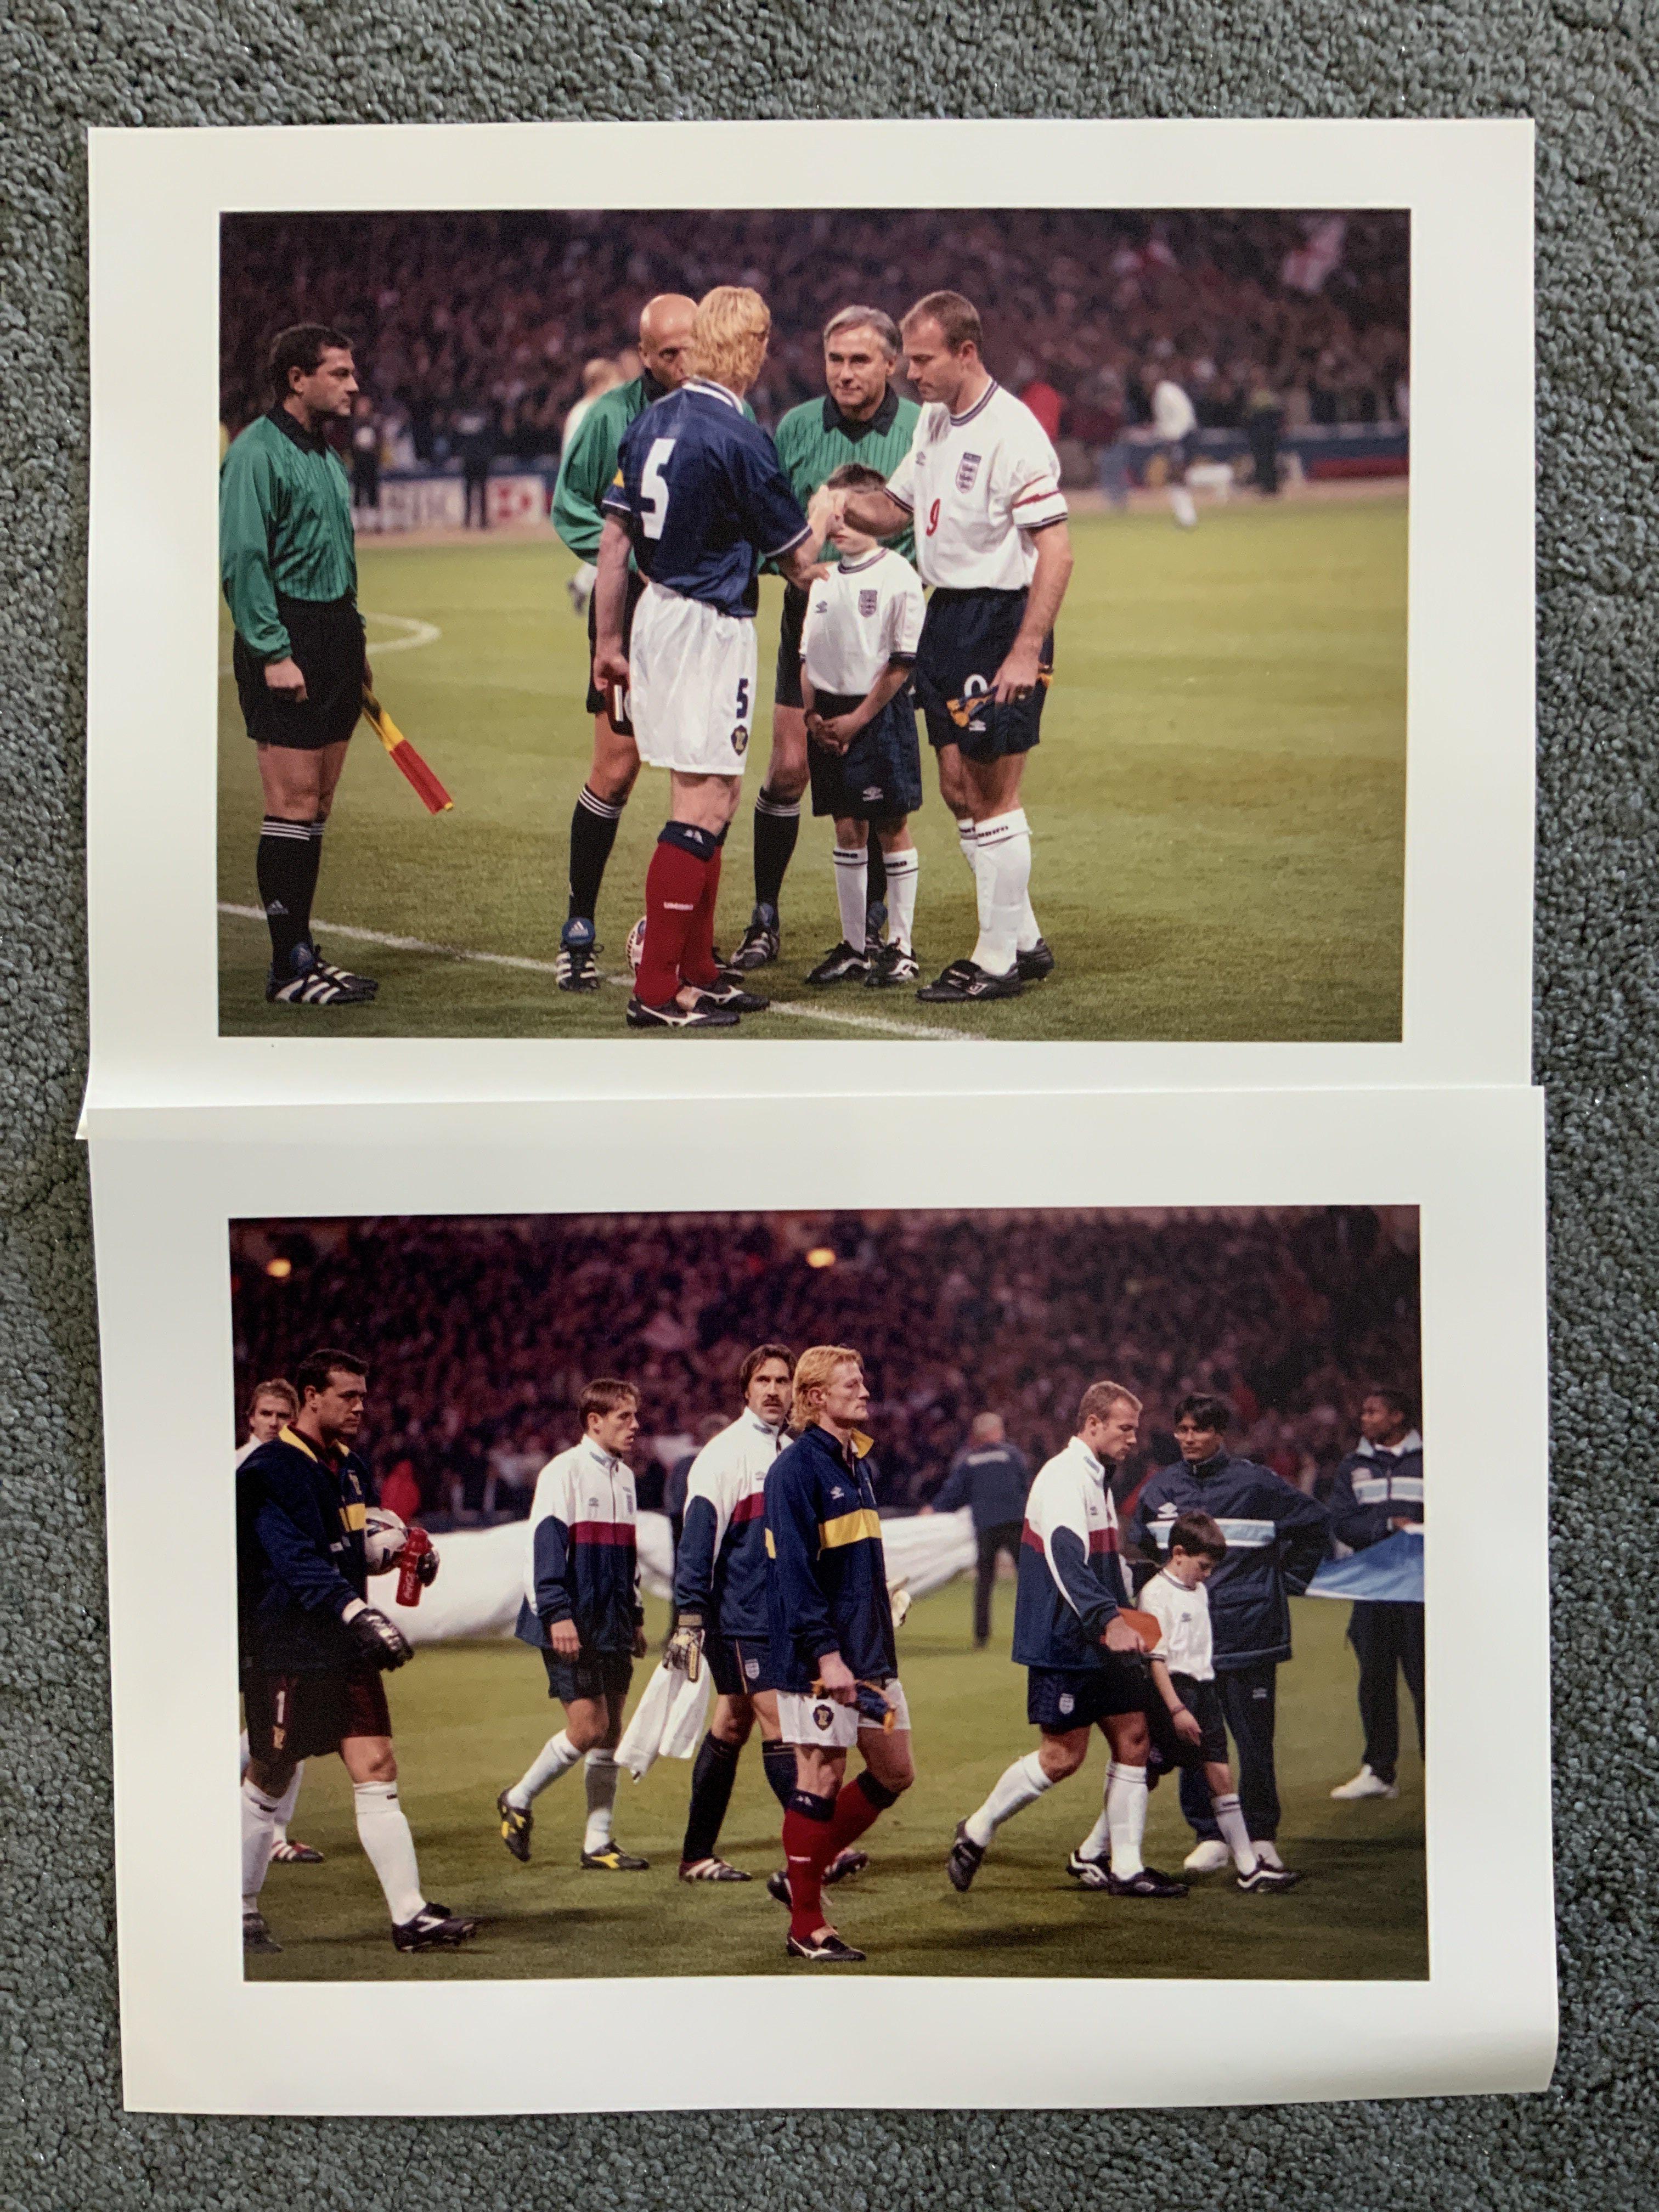 1999 England v Scotland Exchange Football Pennant: European Championship Play Off at Wembley on 17 - Image 2 of 2